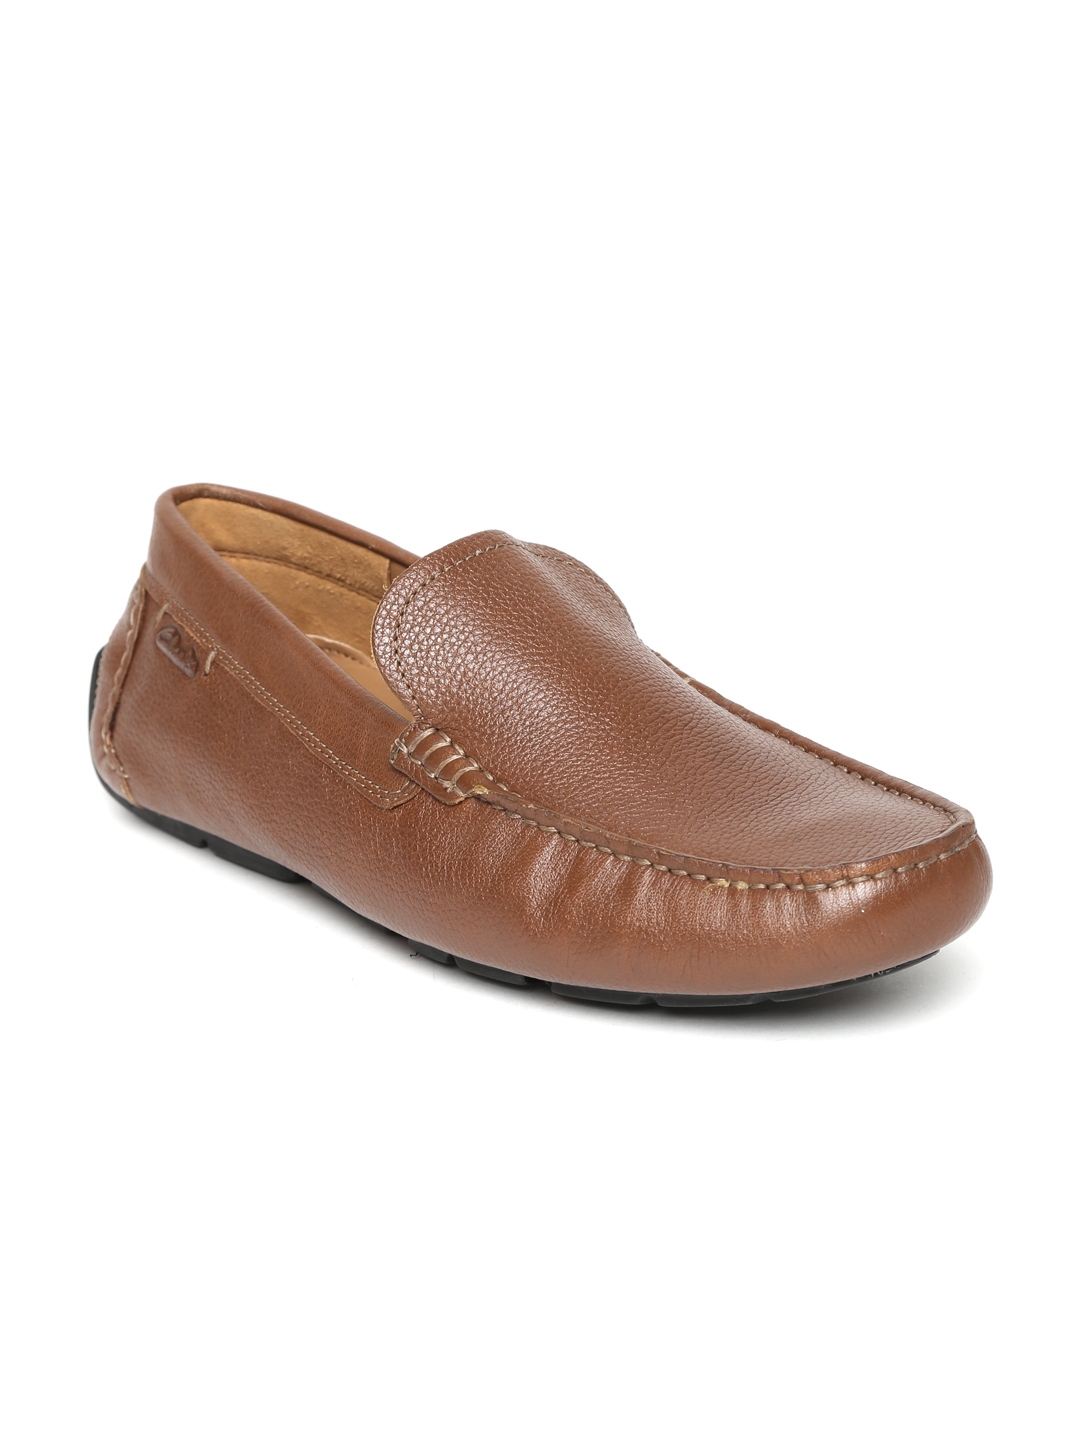 Buy Clarks Men Brown Leather Driving Shoes - Casual Shoes for Men ...